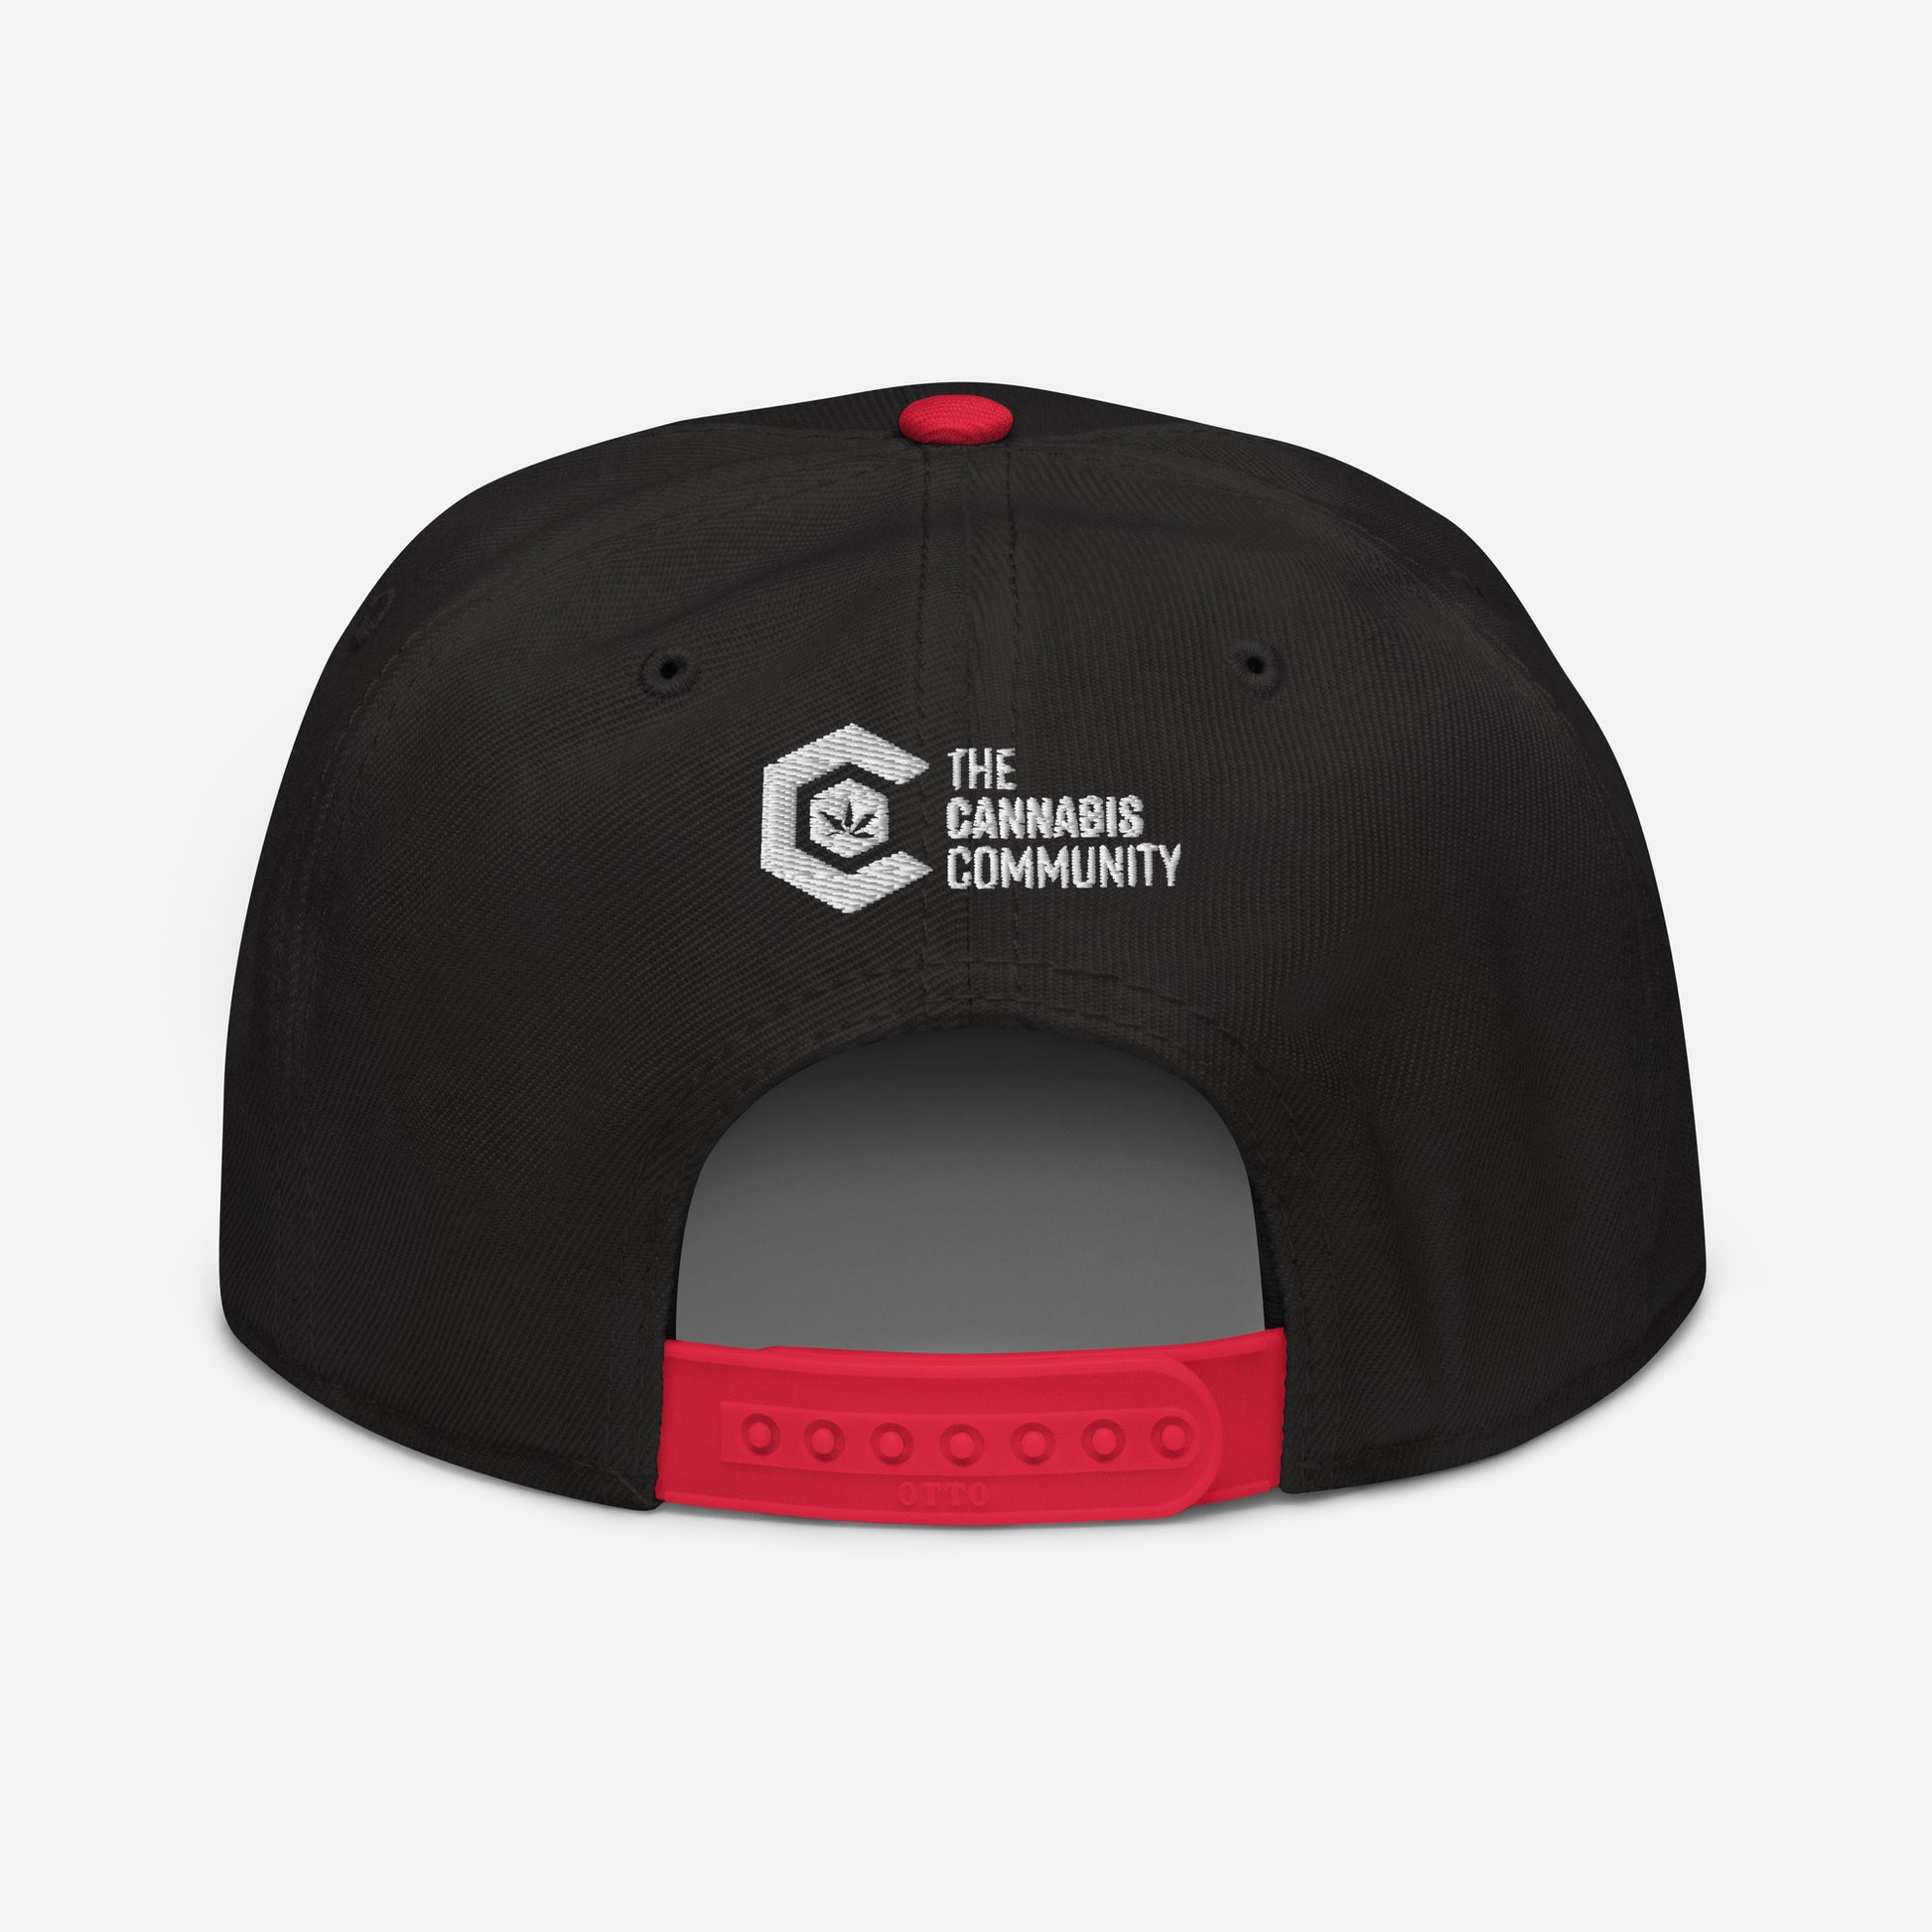 Golden Goat Cannabis Snapback Hat with "the cannabis community" logo on the front.